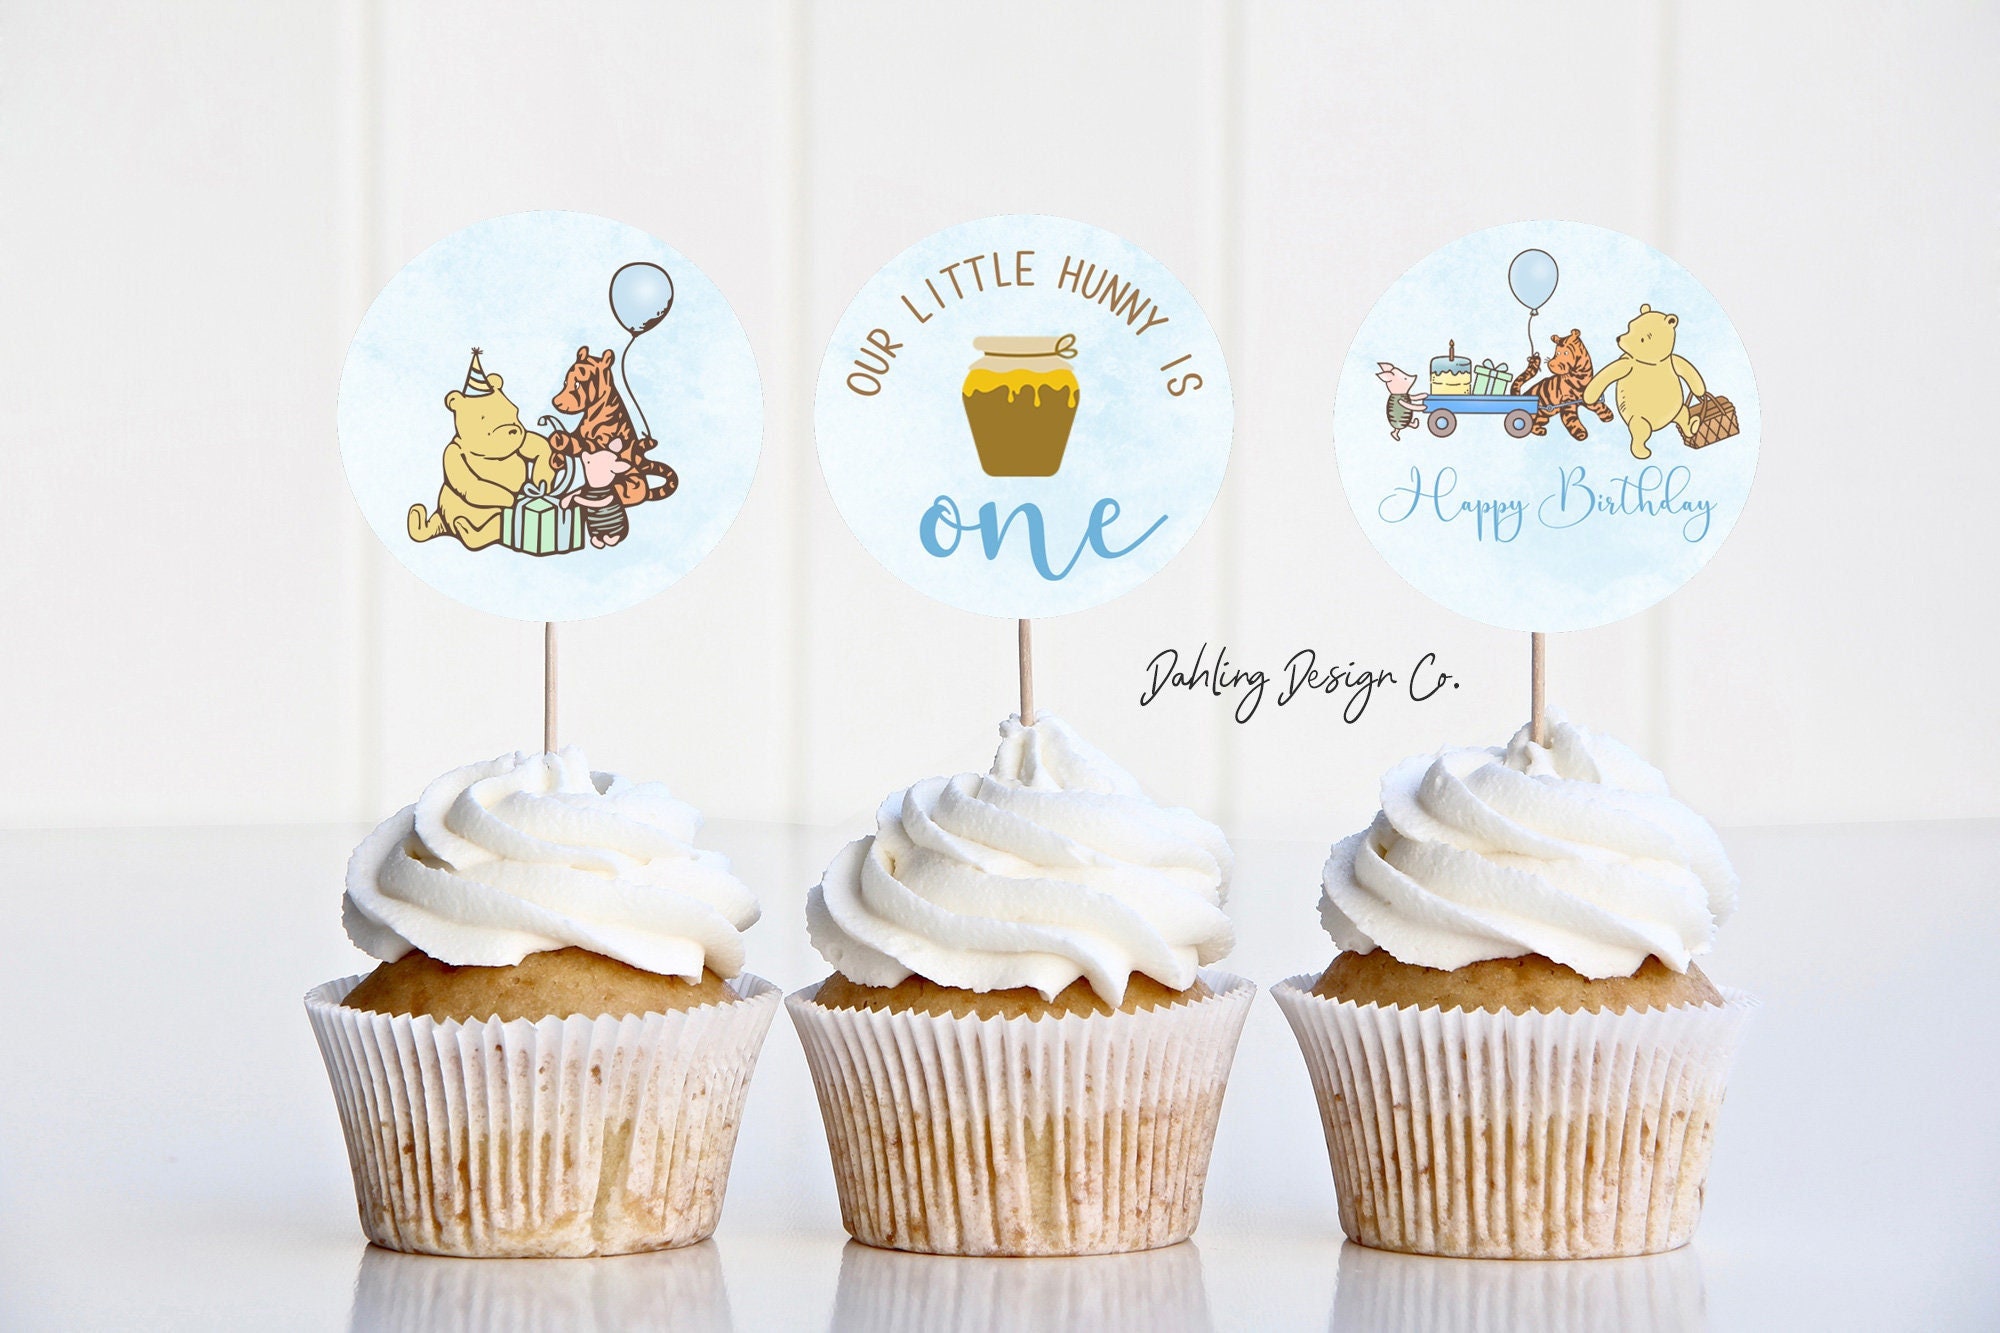 48 Pcs Winnie Cupcake Toppers for Winnie Baby Shower Birthday Party Decoration Supplies Cute The Pooh Cake Topper for Baby Shower Decorations